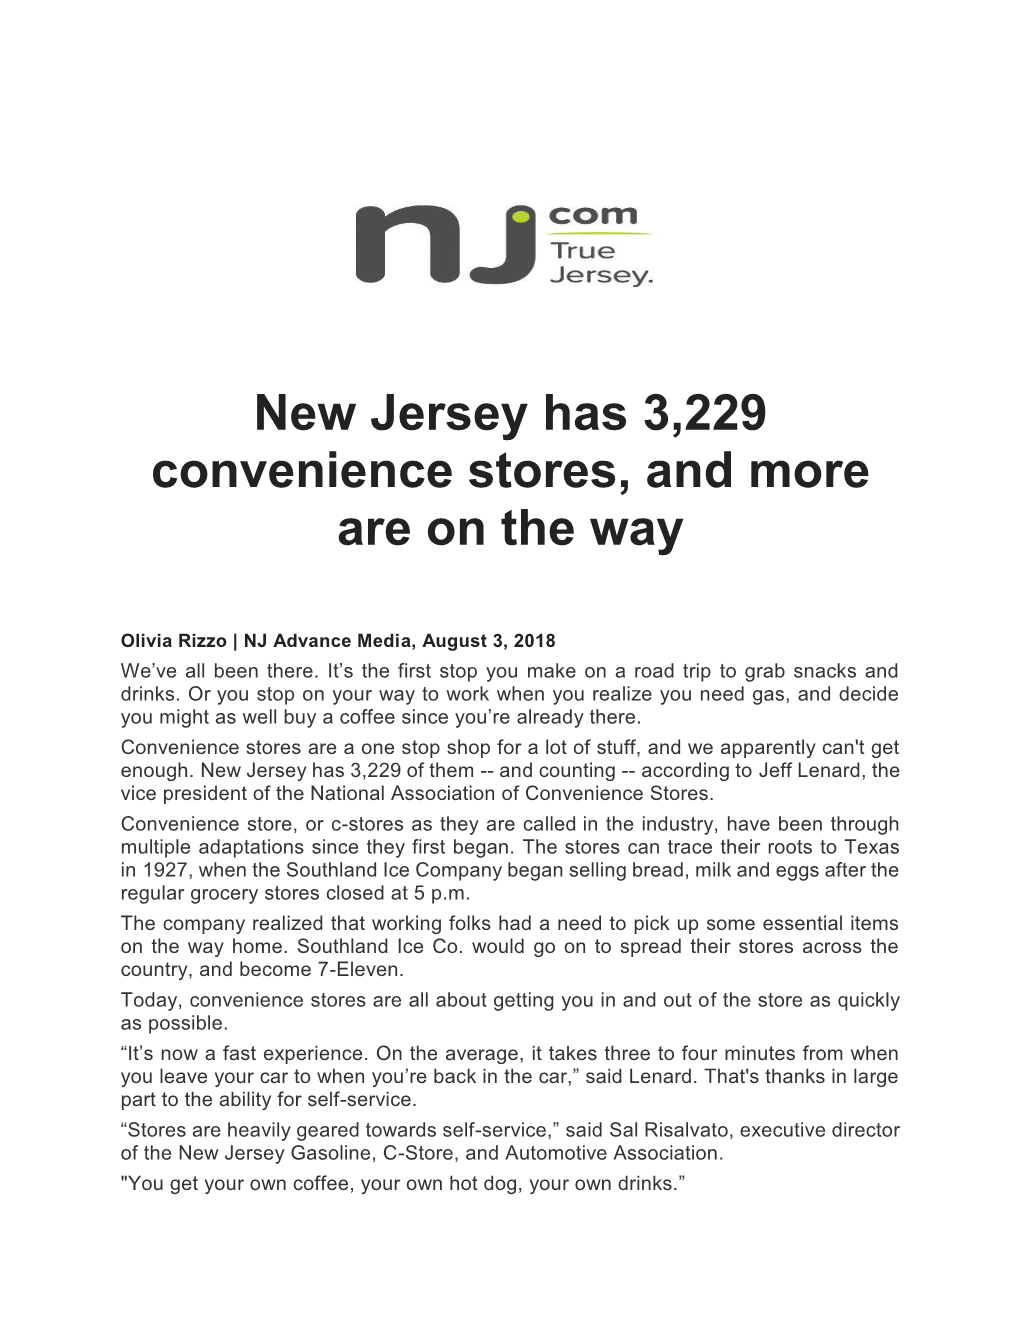 New Jersey Has 3,229 Convenience Stores, and More Are on the Way